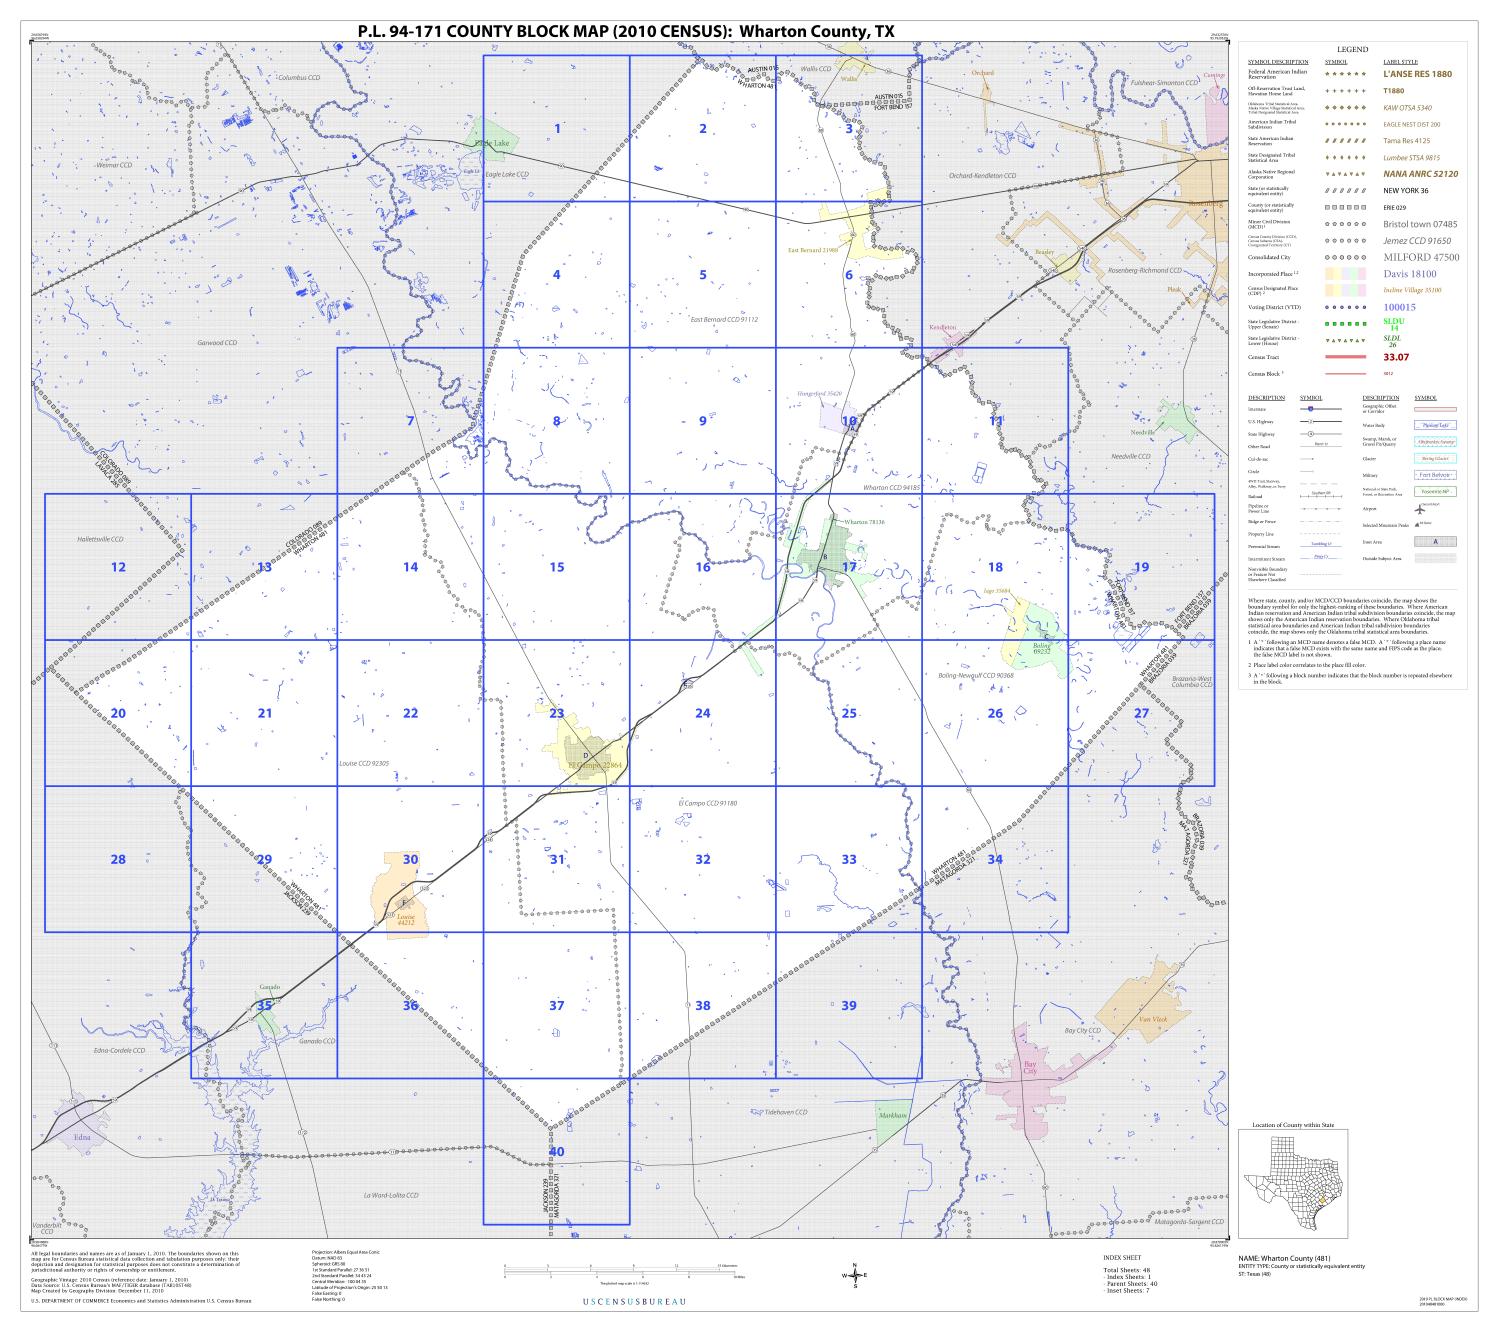 P.L. 94-171 County Block Map (2010 Census): Wharton County, Index
                                                
                                                    [Sequence #]: 1 of 1
                                                